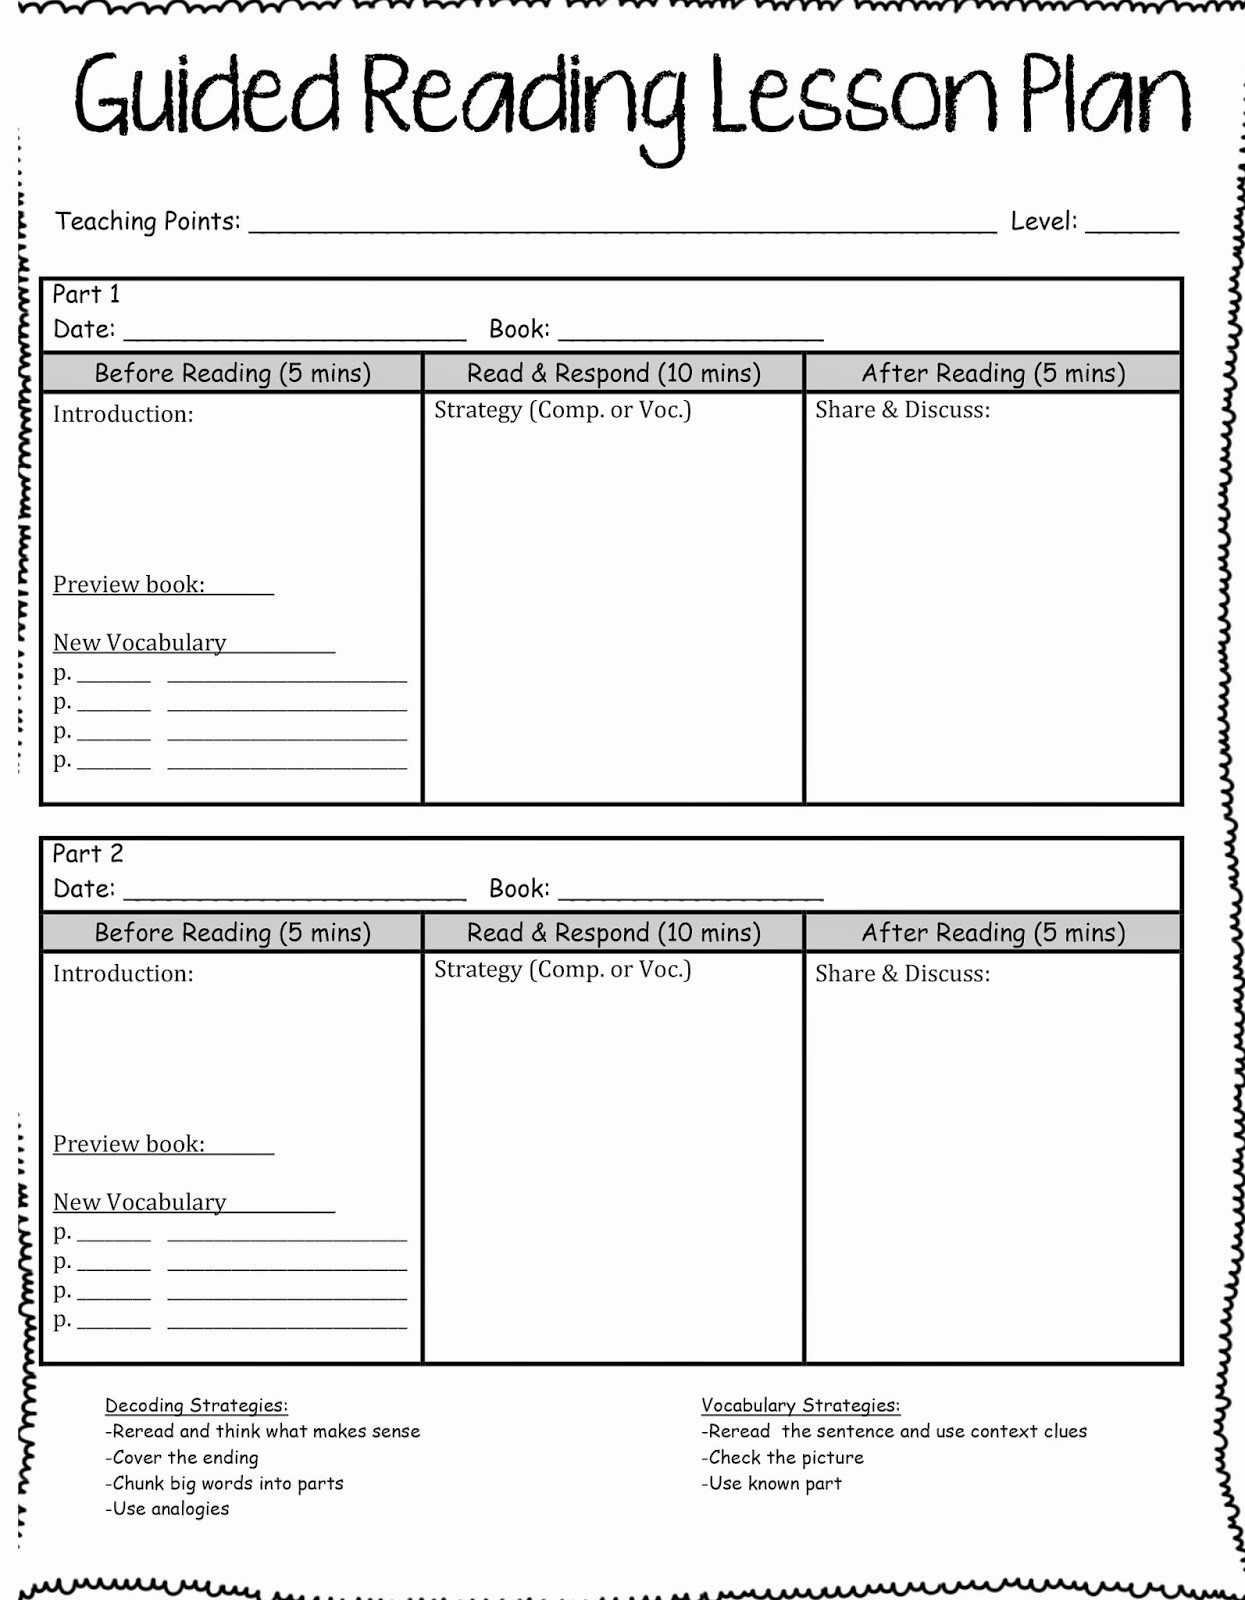 Jan Richardson Lesson Plan Template Awesome Guided Reading Lesson Plan Template